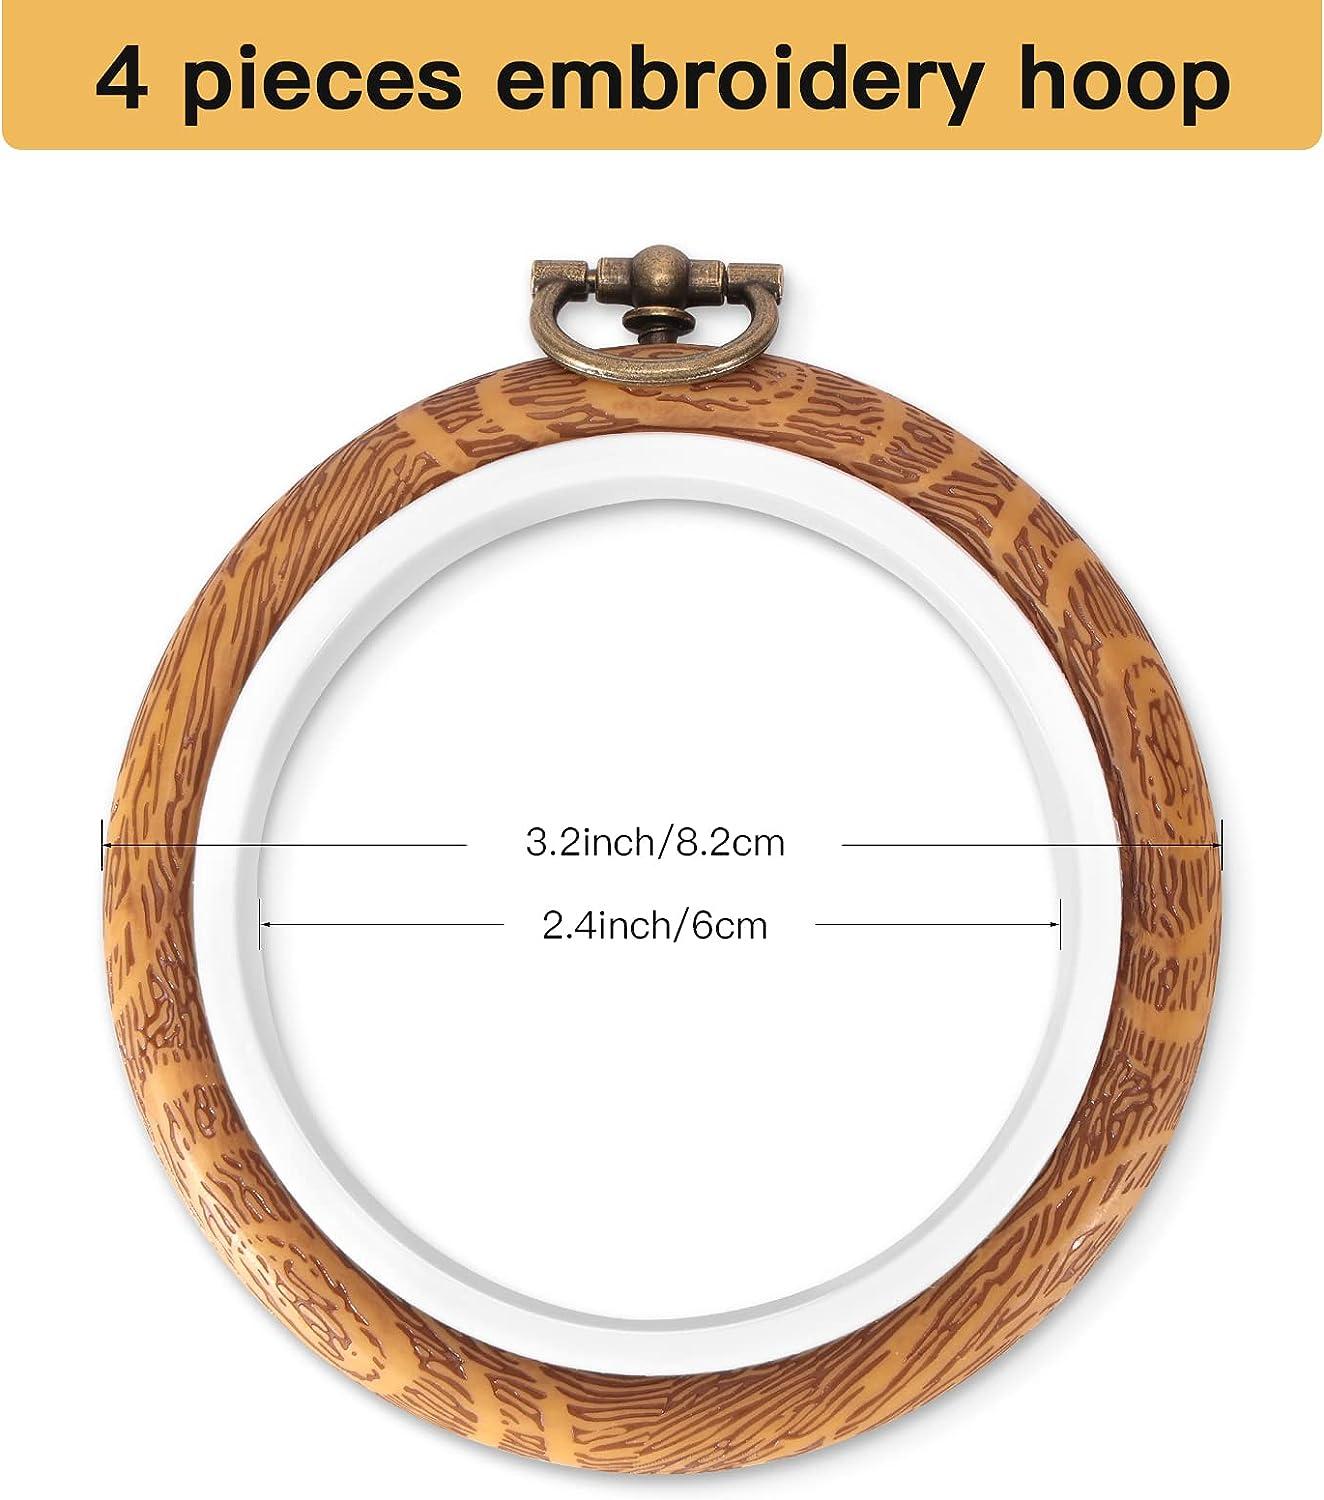 4 Inch Embroidery Frame,Embroidery Hoop,Hoop Embroidery, Imitated Wood  Display Frame Circle 4 Pieces, with 1 PCS Sewing Needle Cylinder